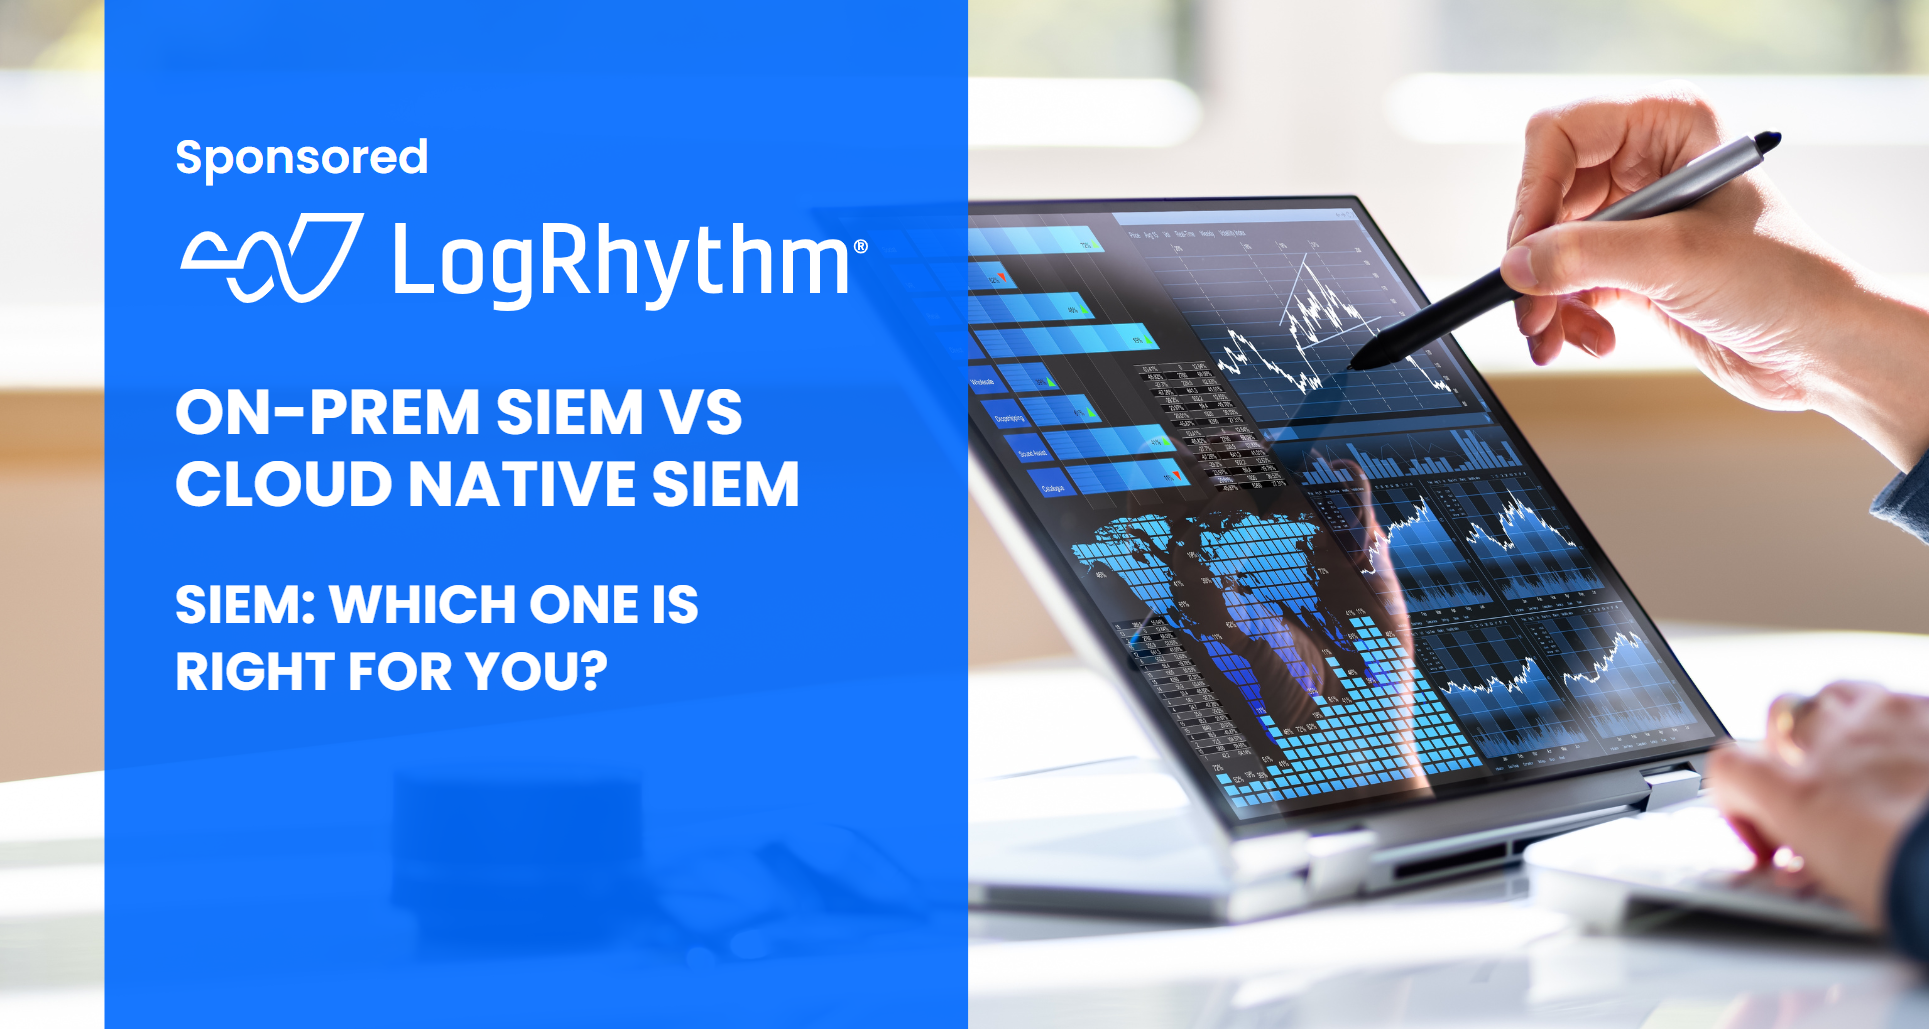 >Which SIEM is right for you?